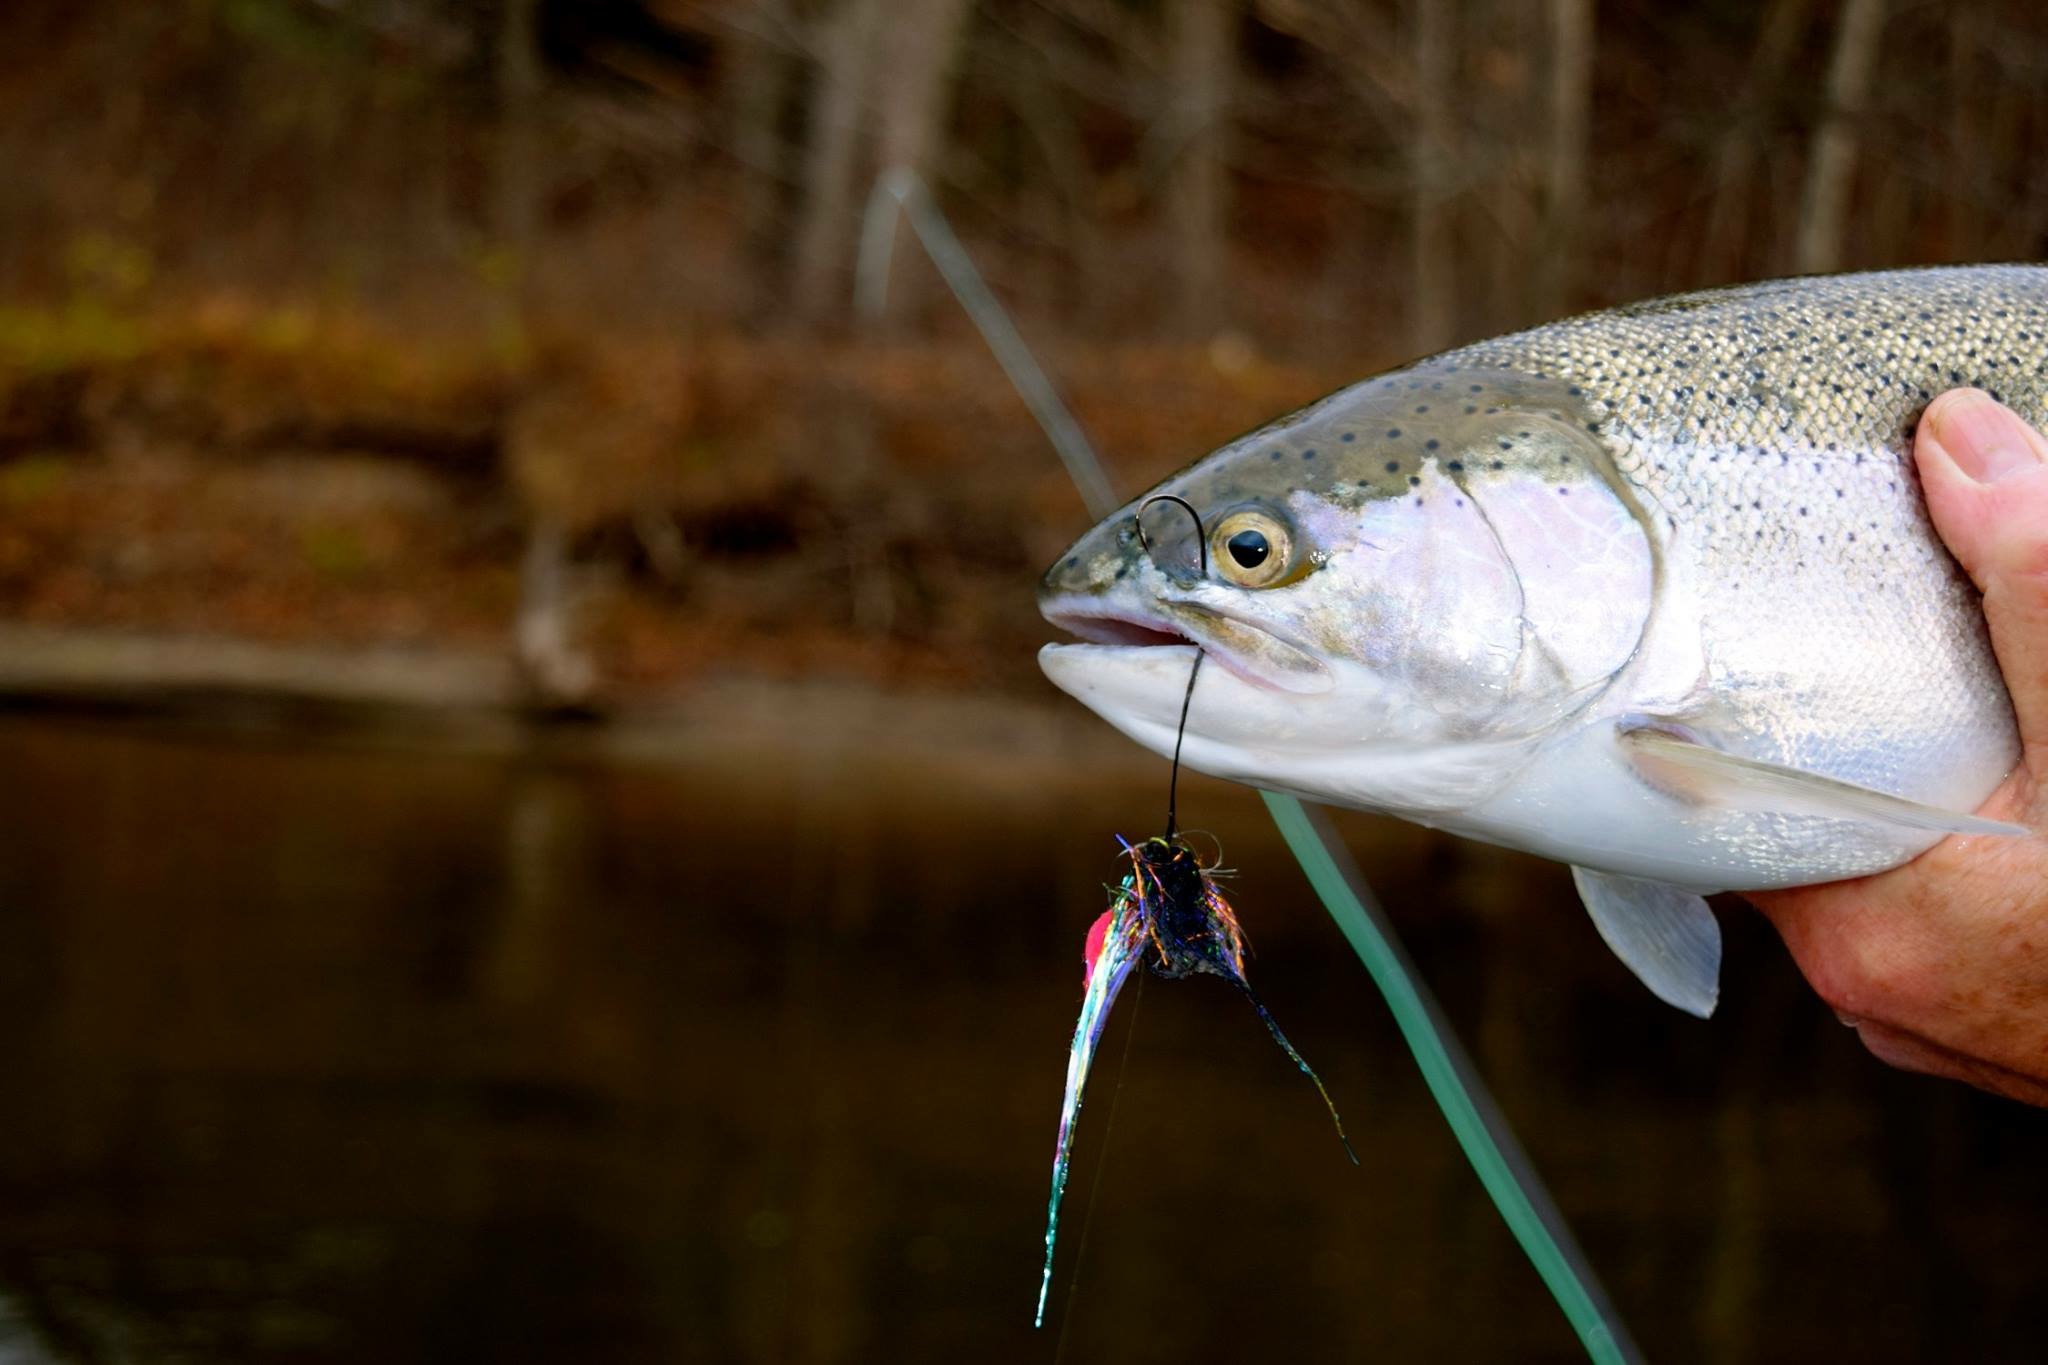 Flyfishing guide in Michigan on the Muskegon, Tittabawassee and